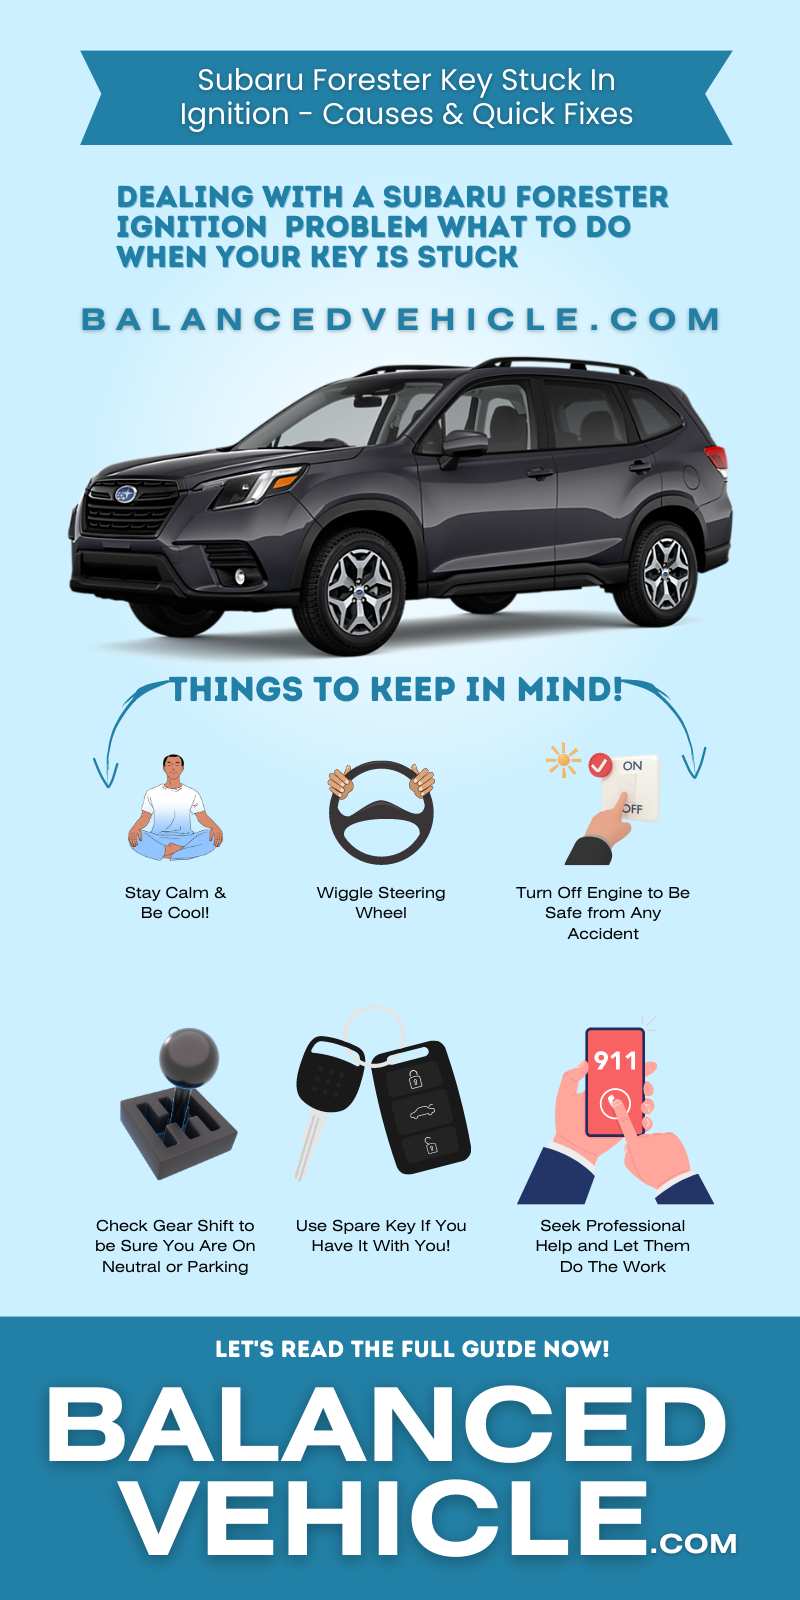 Subaru Forester Key Stuck In Ignition - infographic